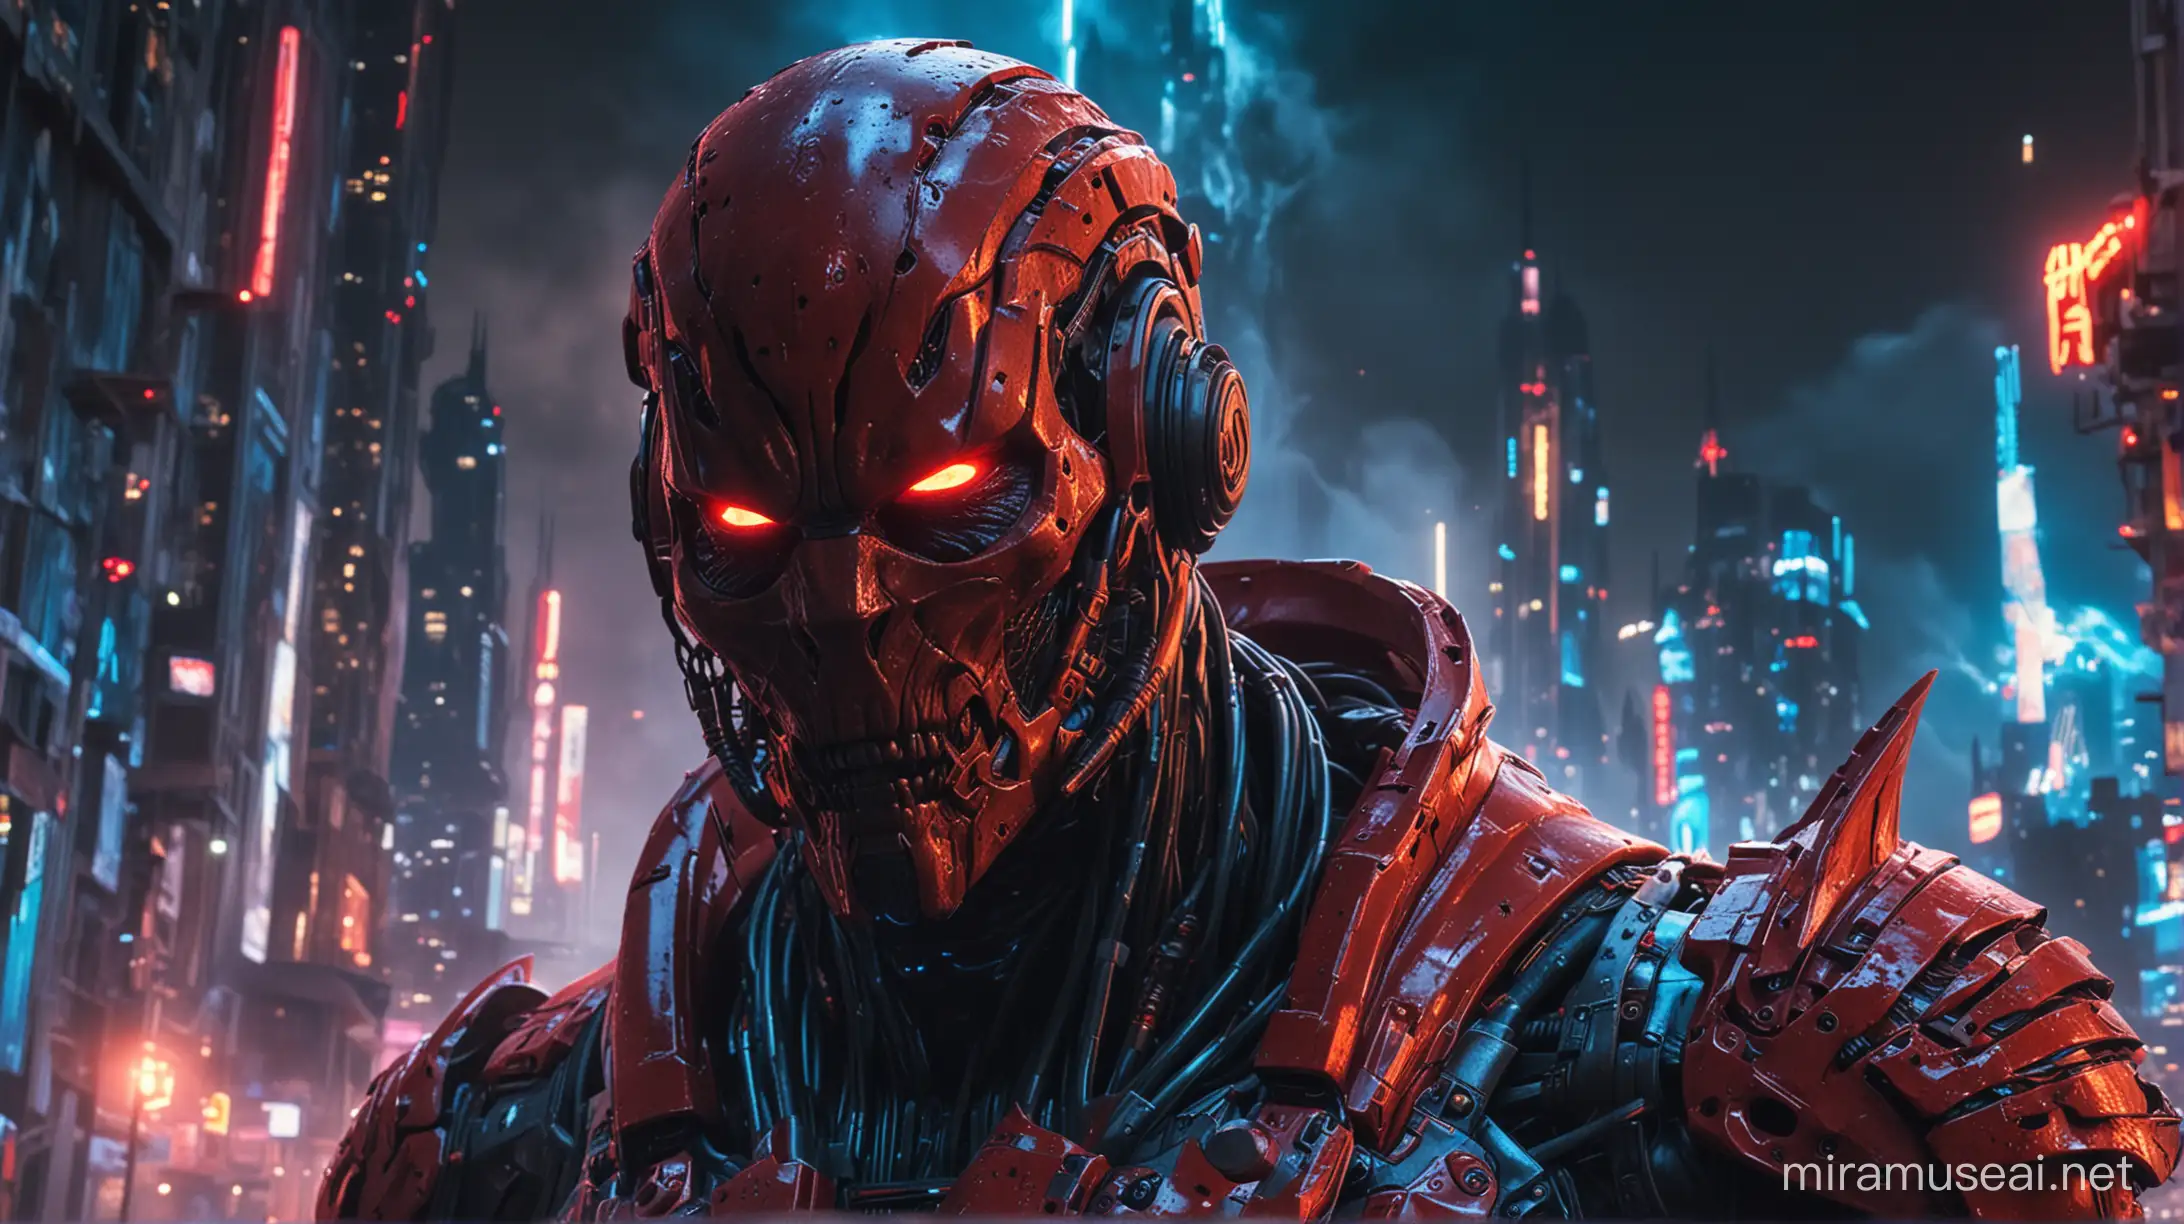 An extreme close up of a menacing, scary, evil man with extremely reflective and shiny, blood red exoskeleton amidst a stunningly beautiful, densely built, neon blue and red colored futuristic, alien city with giant citadels, incandescent lightning, laser blasts, multiple luminescent explosions, smoke plumes and stunning lens flares across a gorgeous starlit night sky.